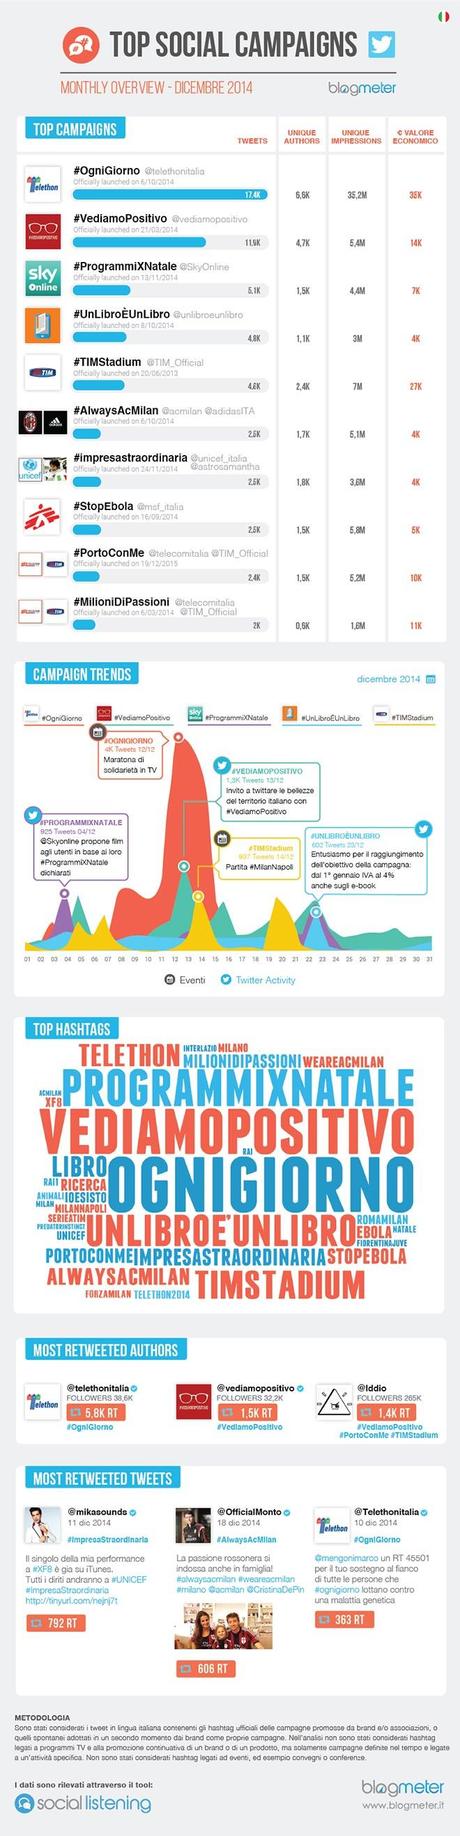 campagne-twitter-dicembre-2014-infografica